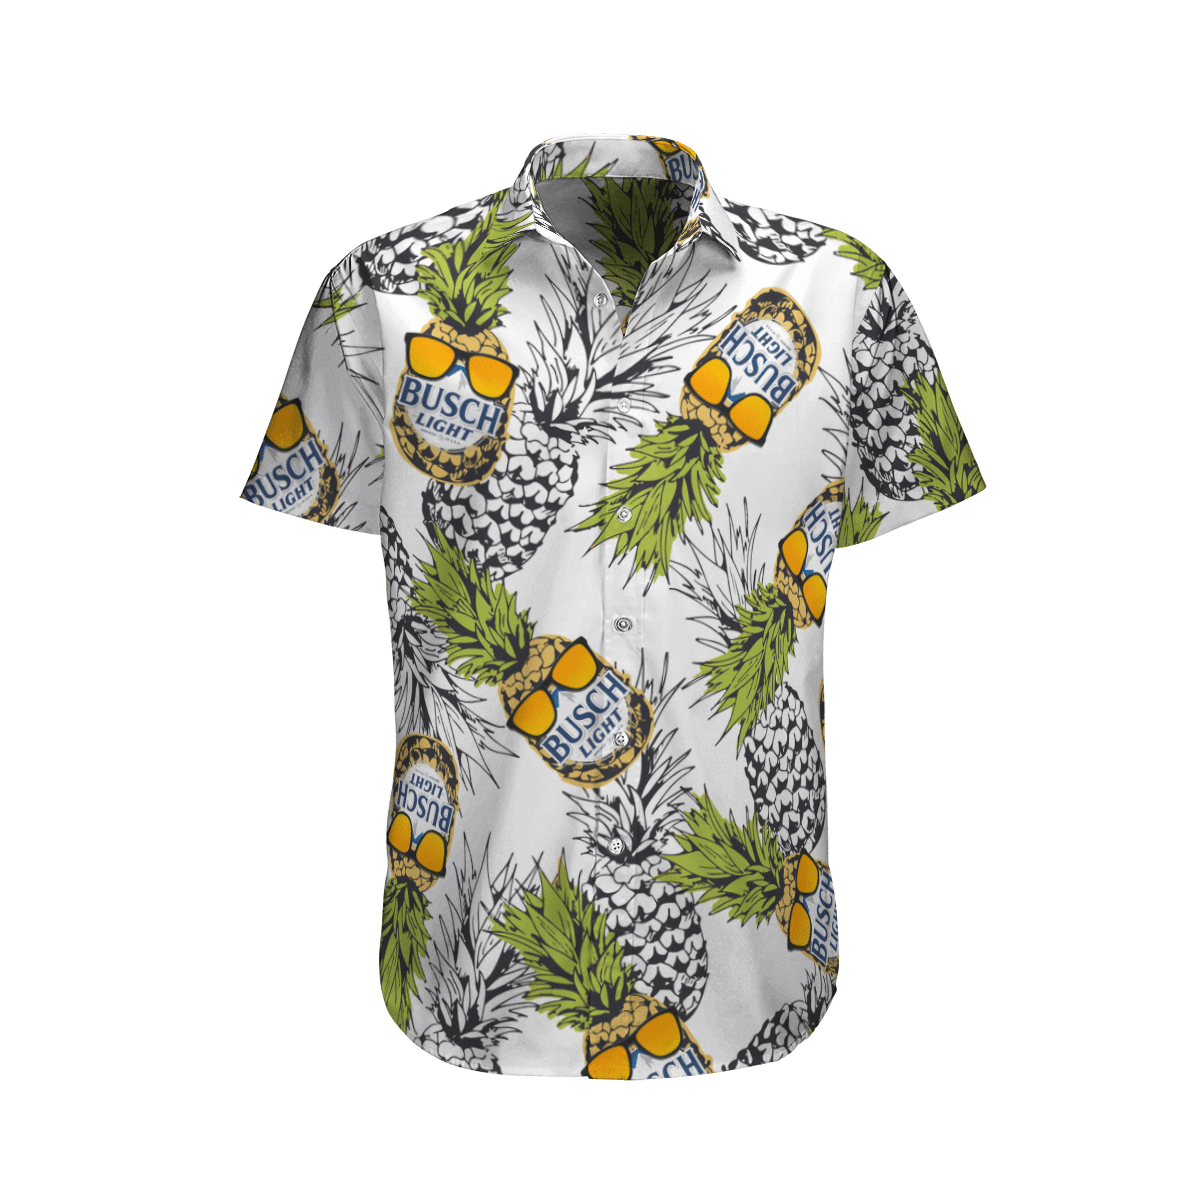 Top cool Hawaiian shirt 2022 - Make sure you get yours today before they run out! 17